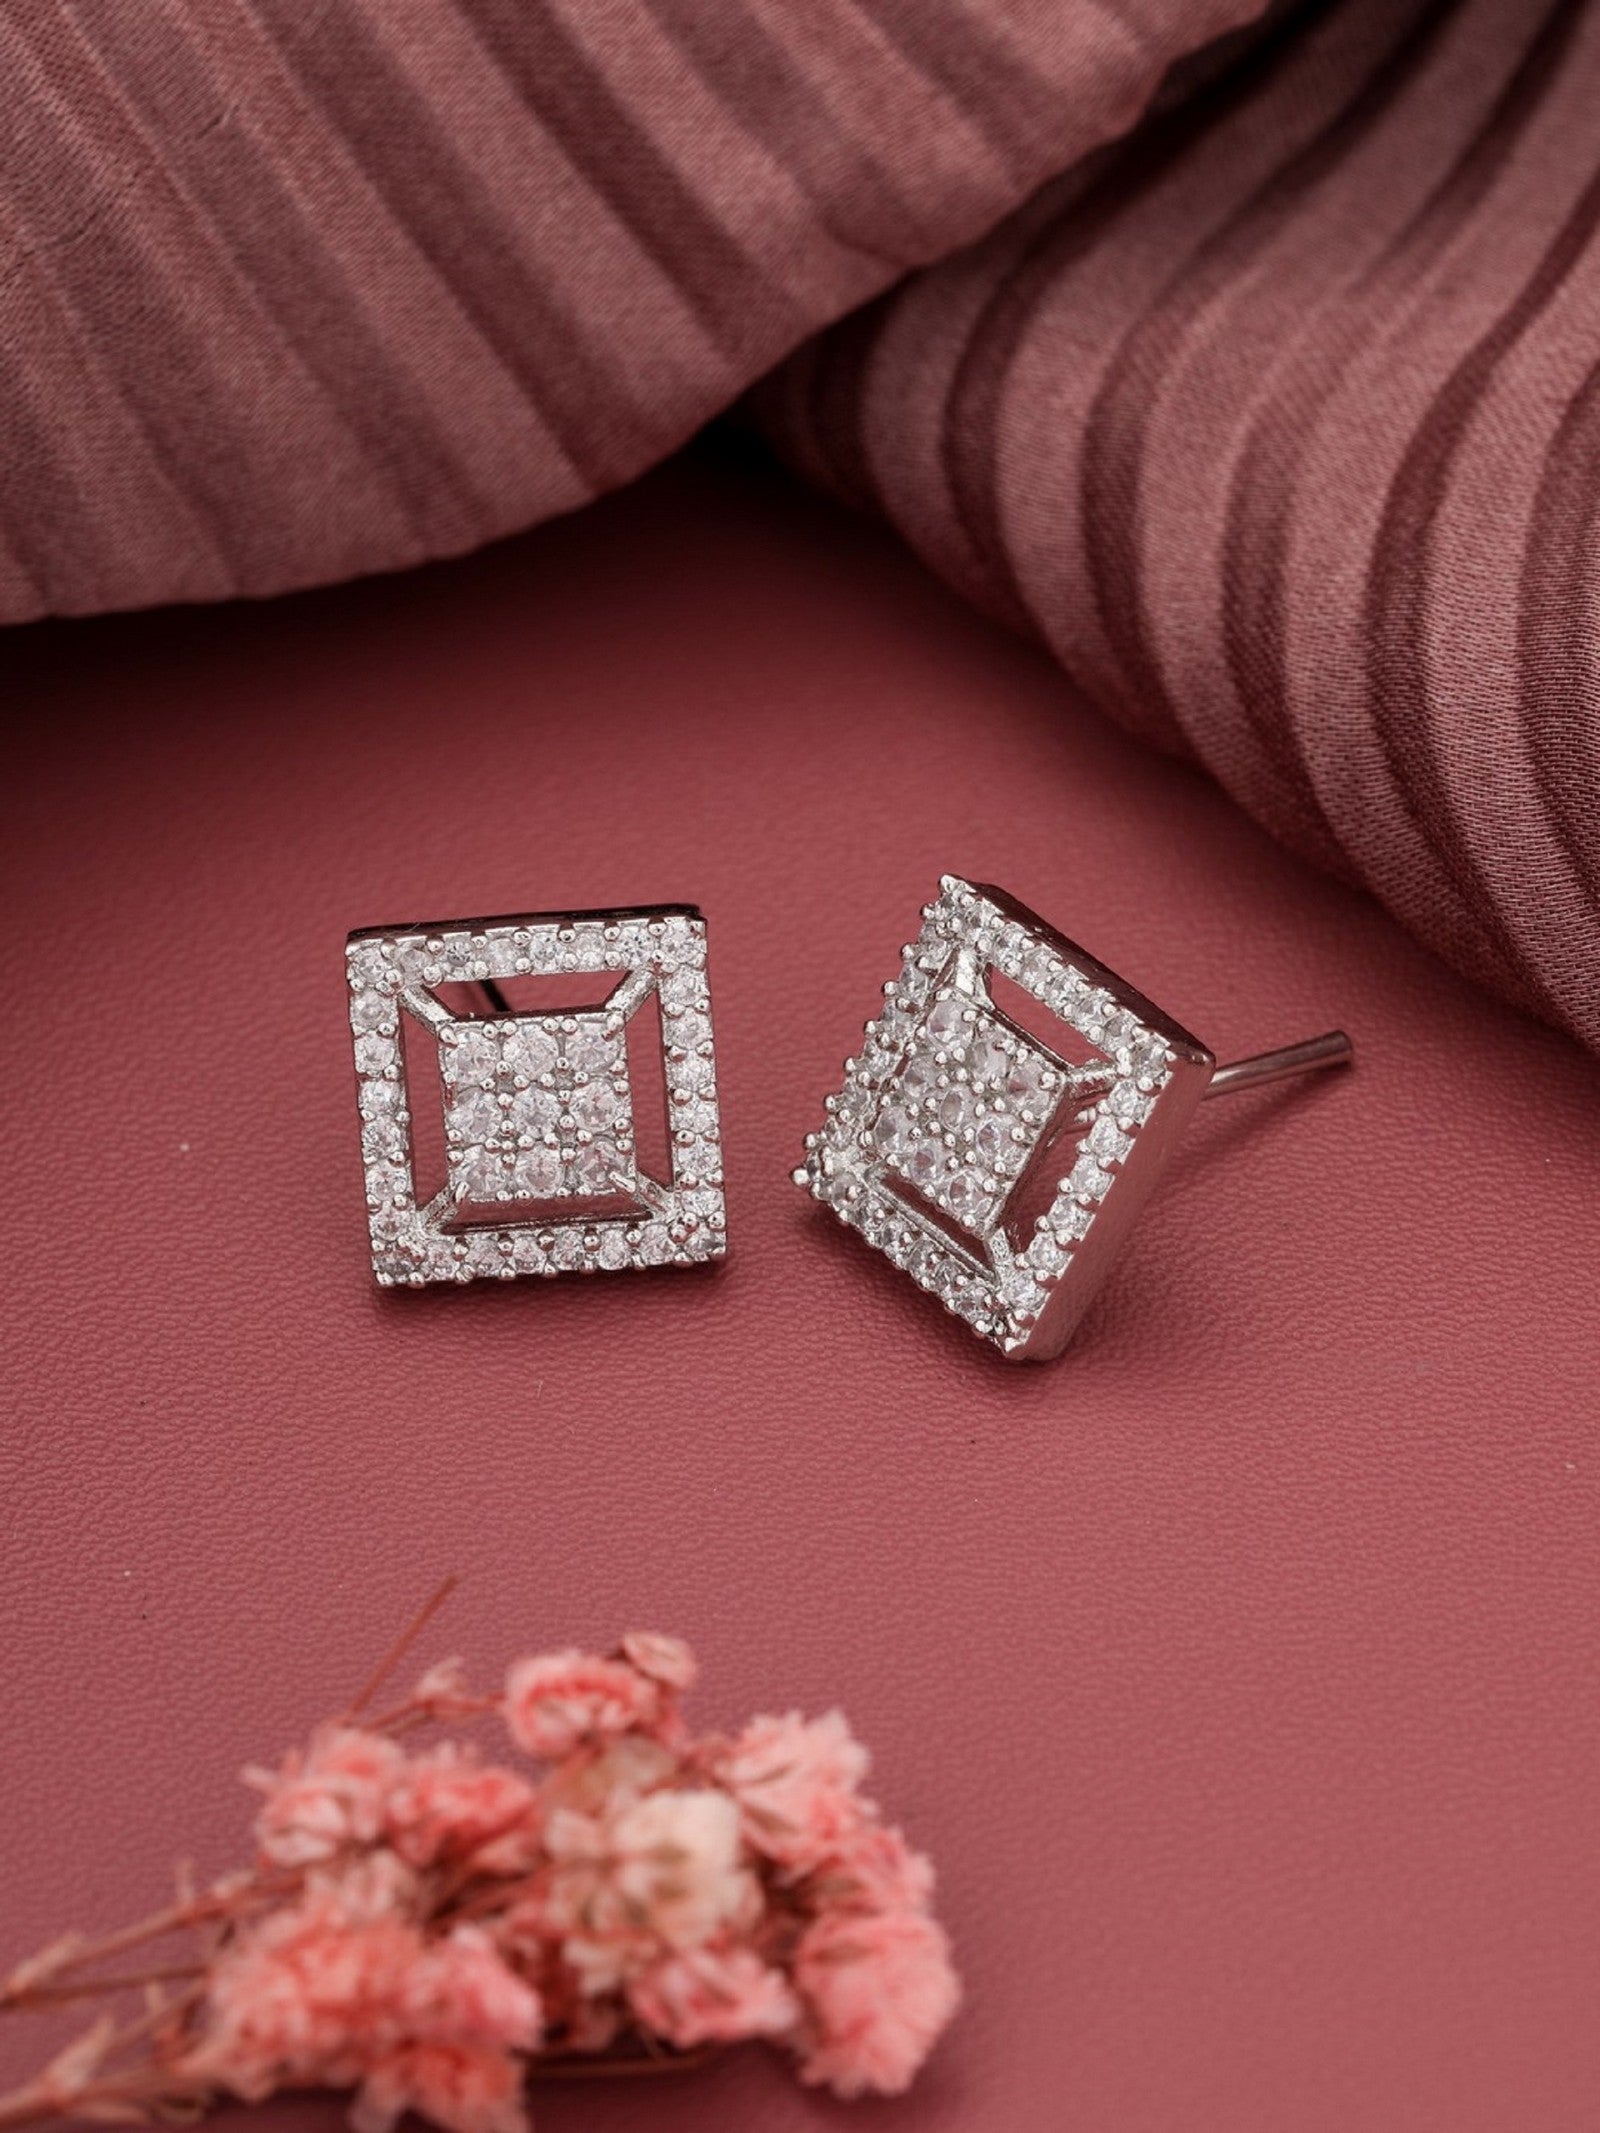 Silver Plated Square Shape Earring With Studed AD Diamond